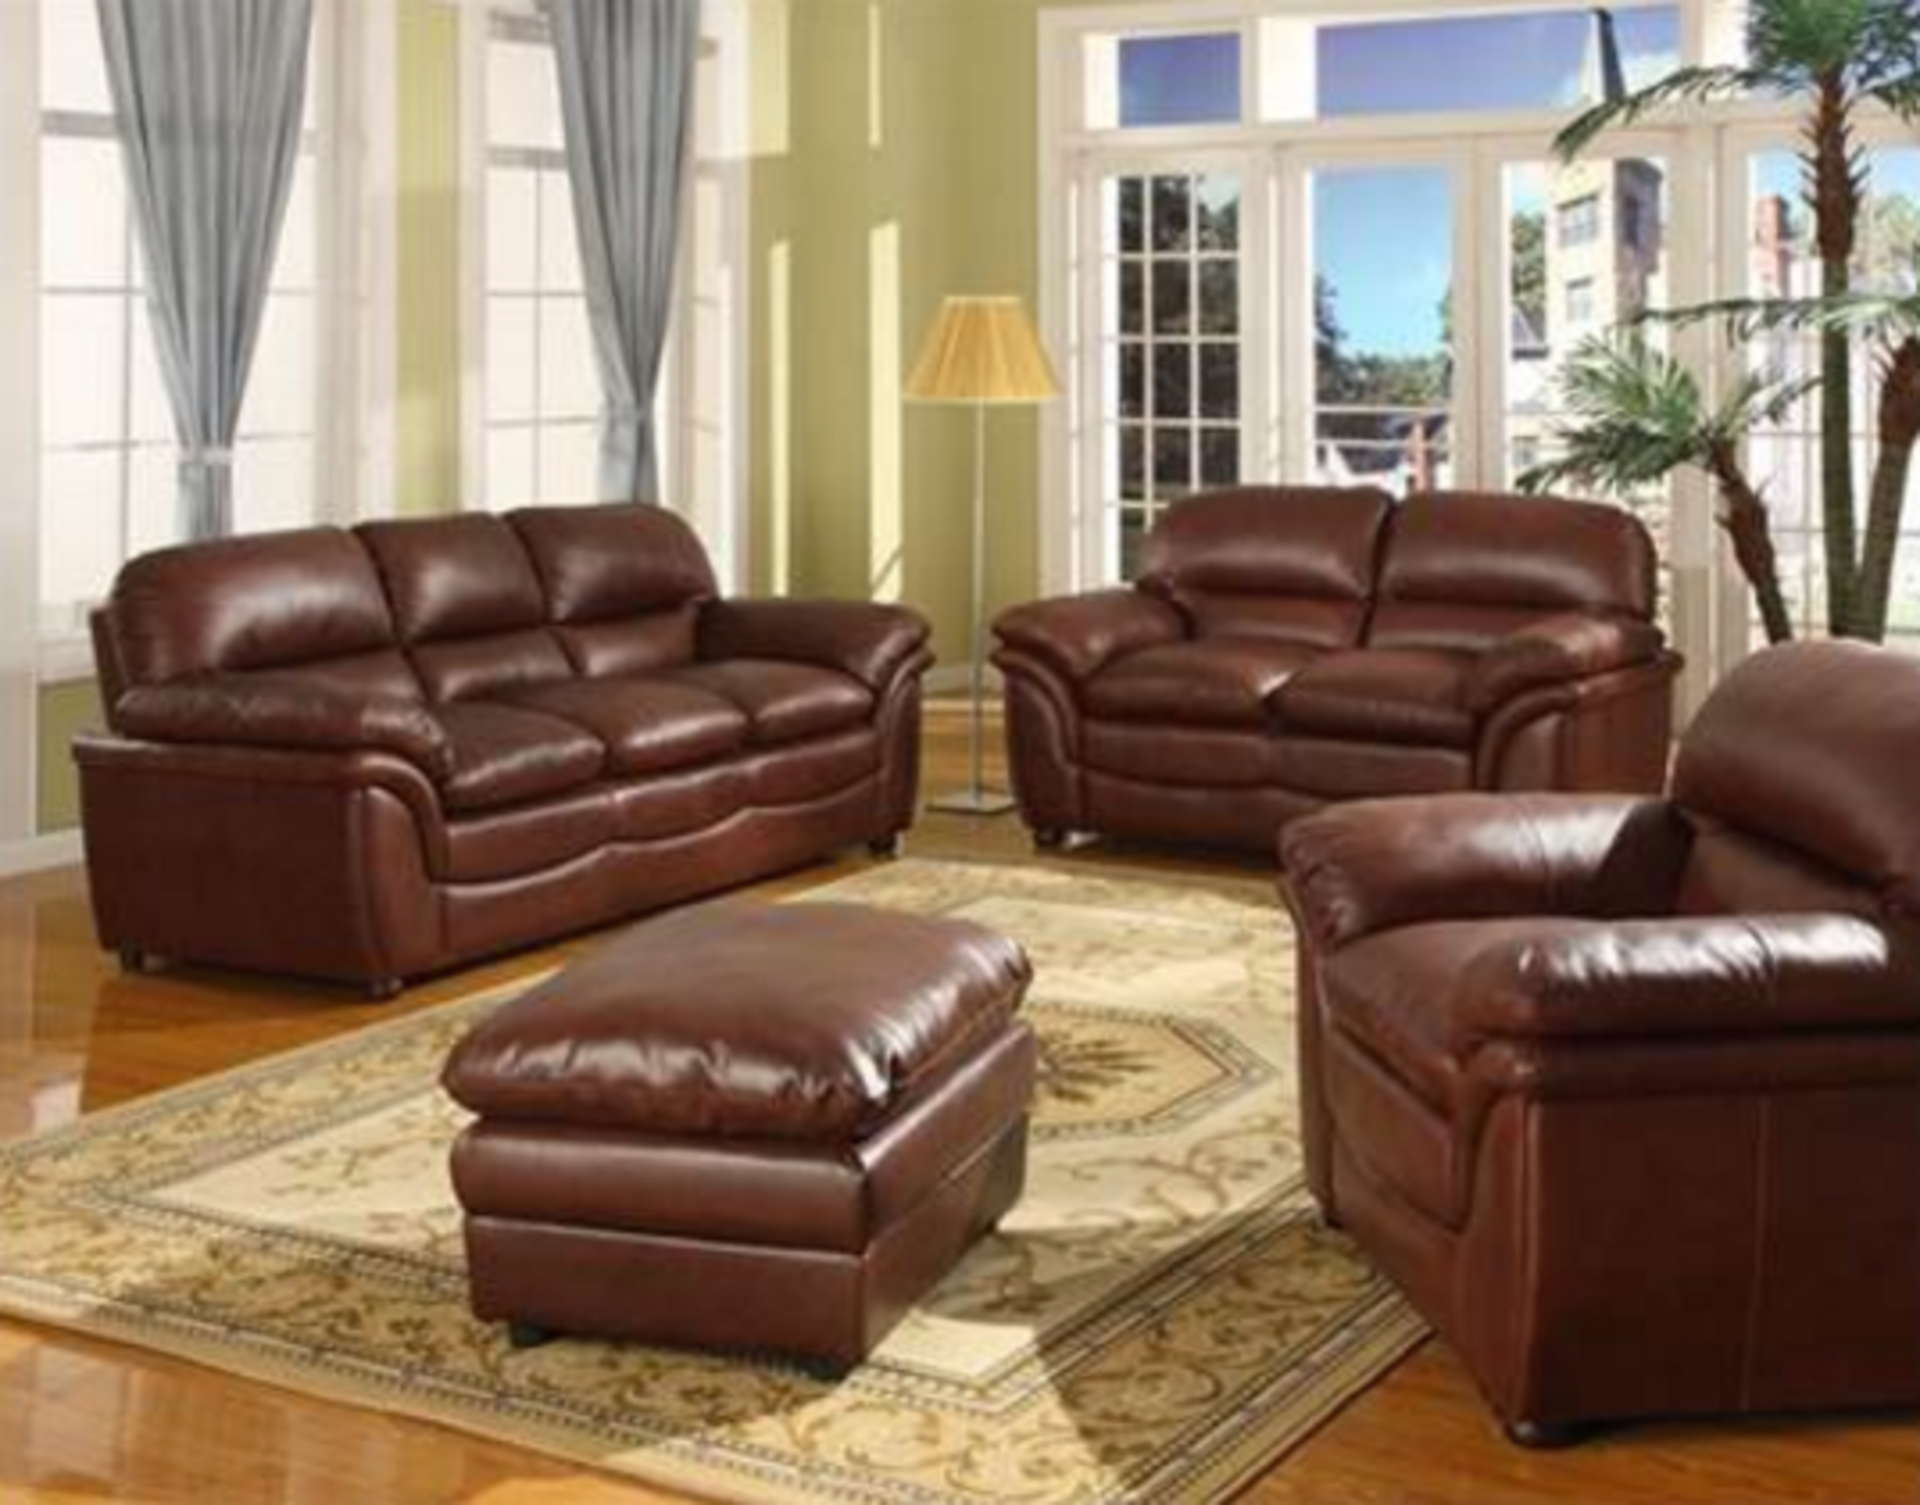 VERONA 3 SEATER AND 2 SEATER SOFAS